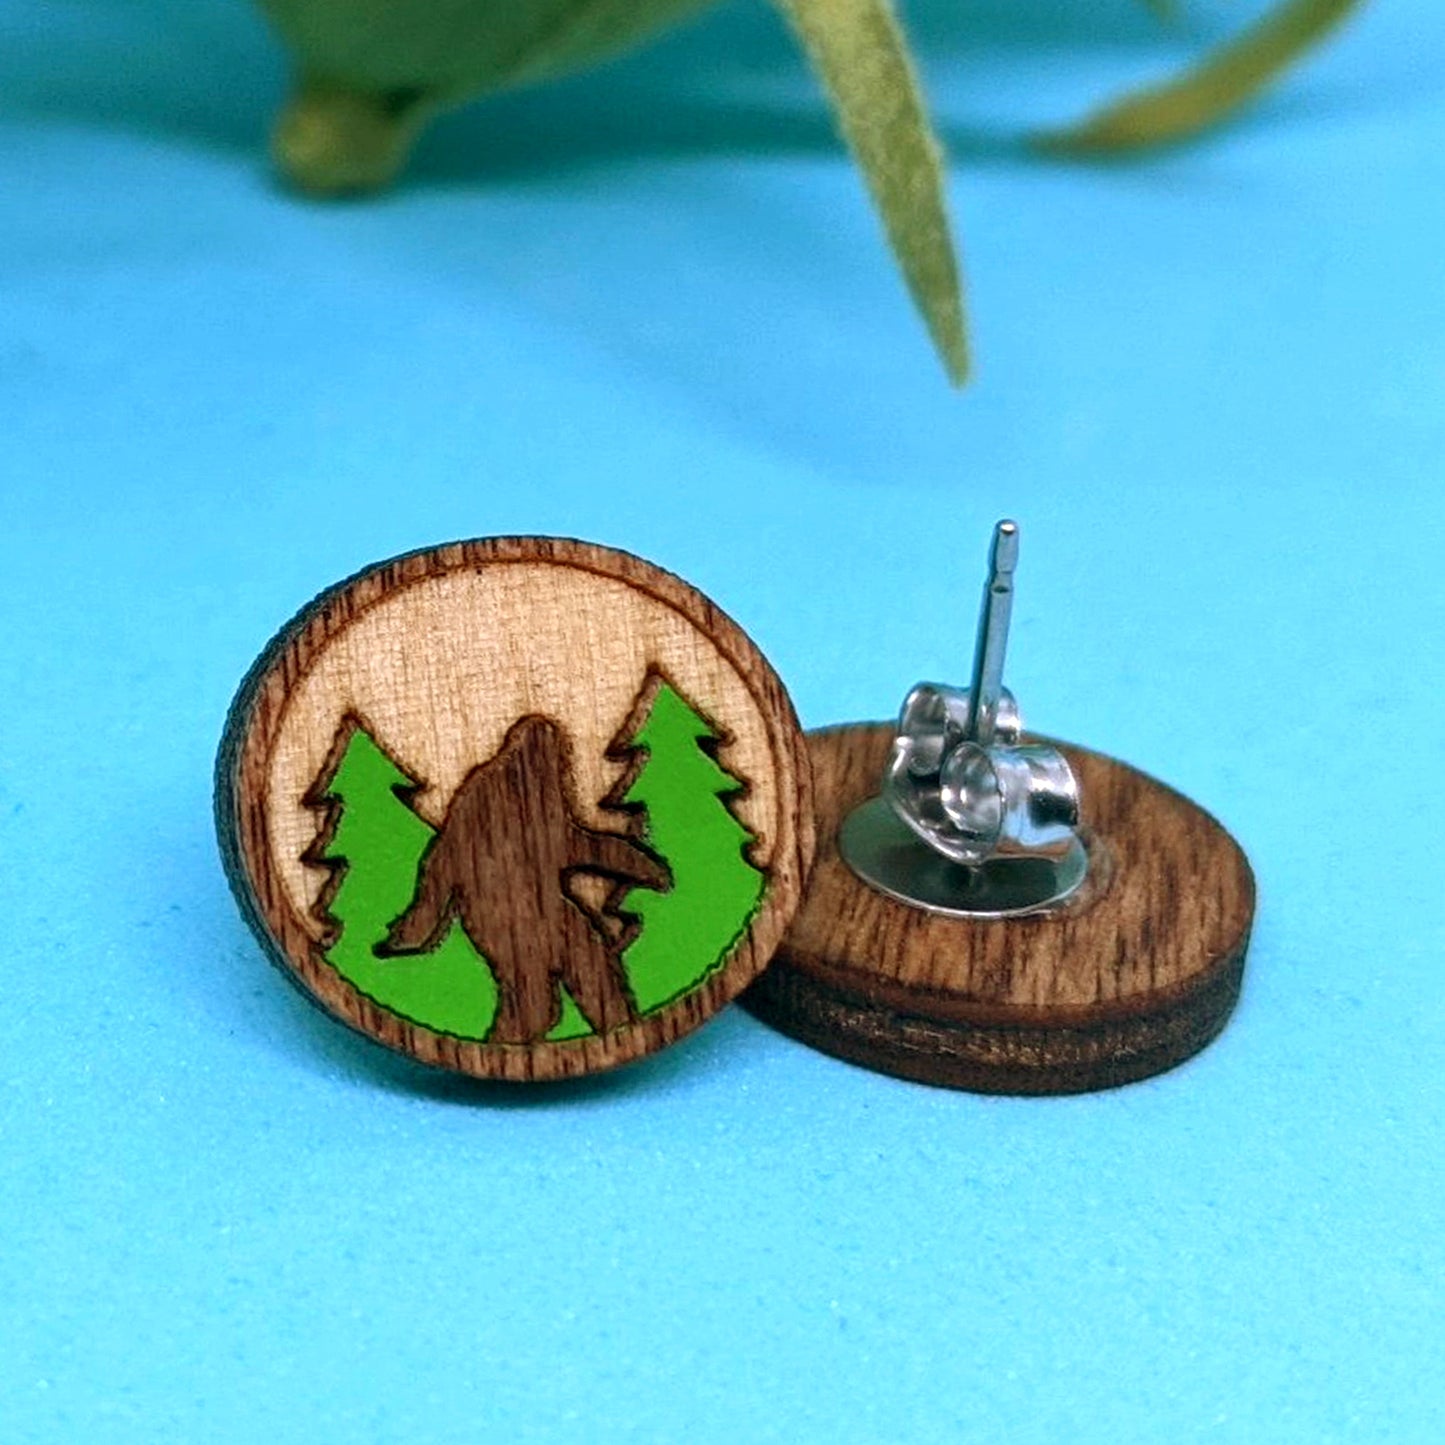 A round wood earring on a blue background. In the center is a carved Bigfoot figure, standing in front of green trees. A second earring is next to it, turned upside down to show the post.